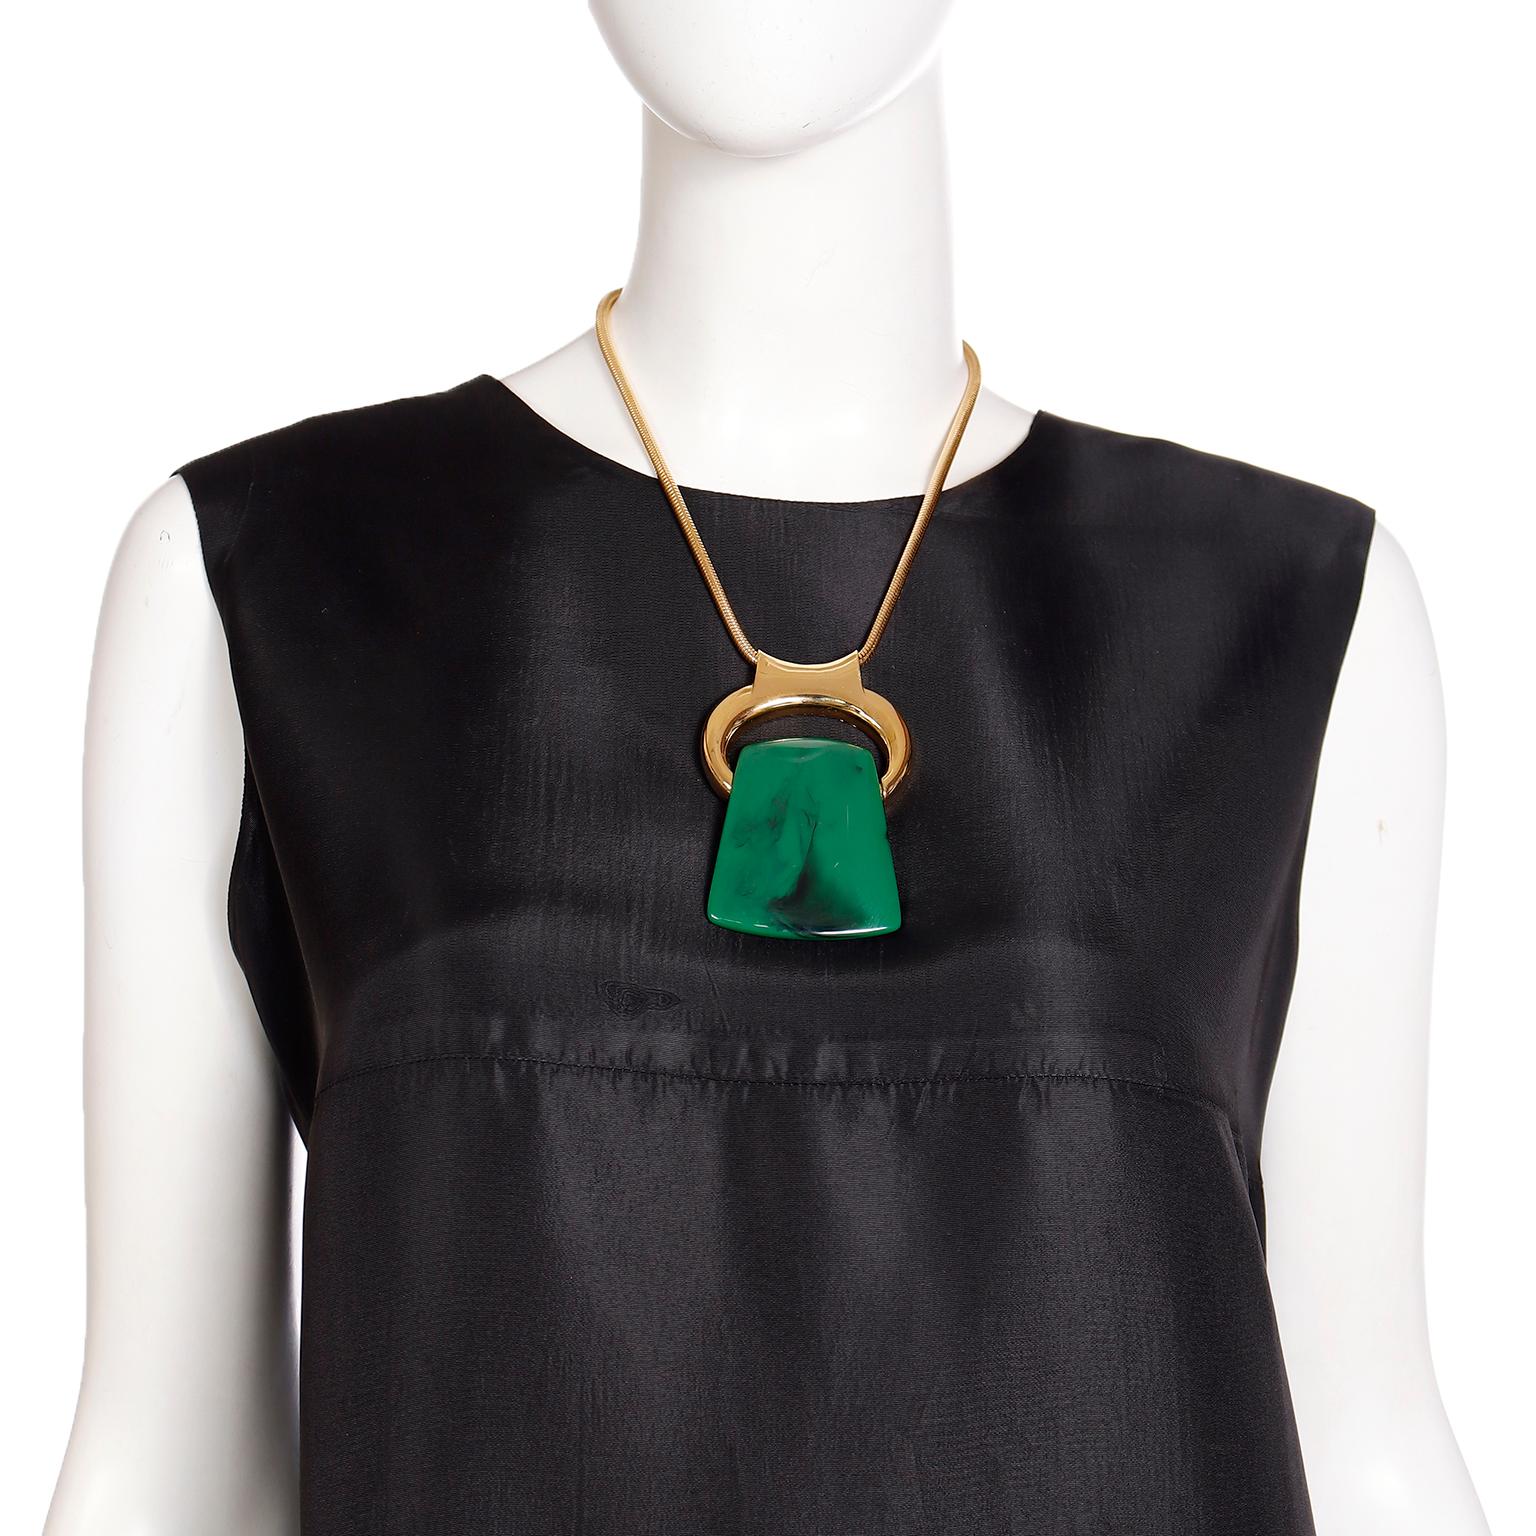 This iconic vintage Bijoux Lanvin necklace from the 1970s is a great set to add to any collection! The gold-plated pendant holder on a snake chain can hold any one of the three interchangeable red, green and brown lucite pendants. The bale on the